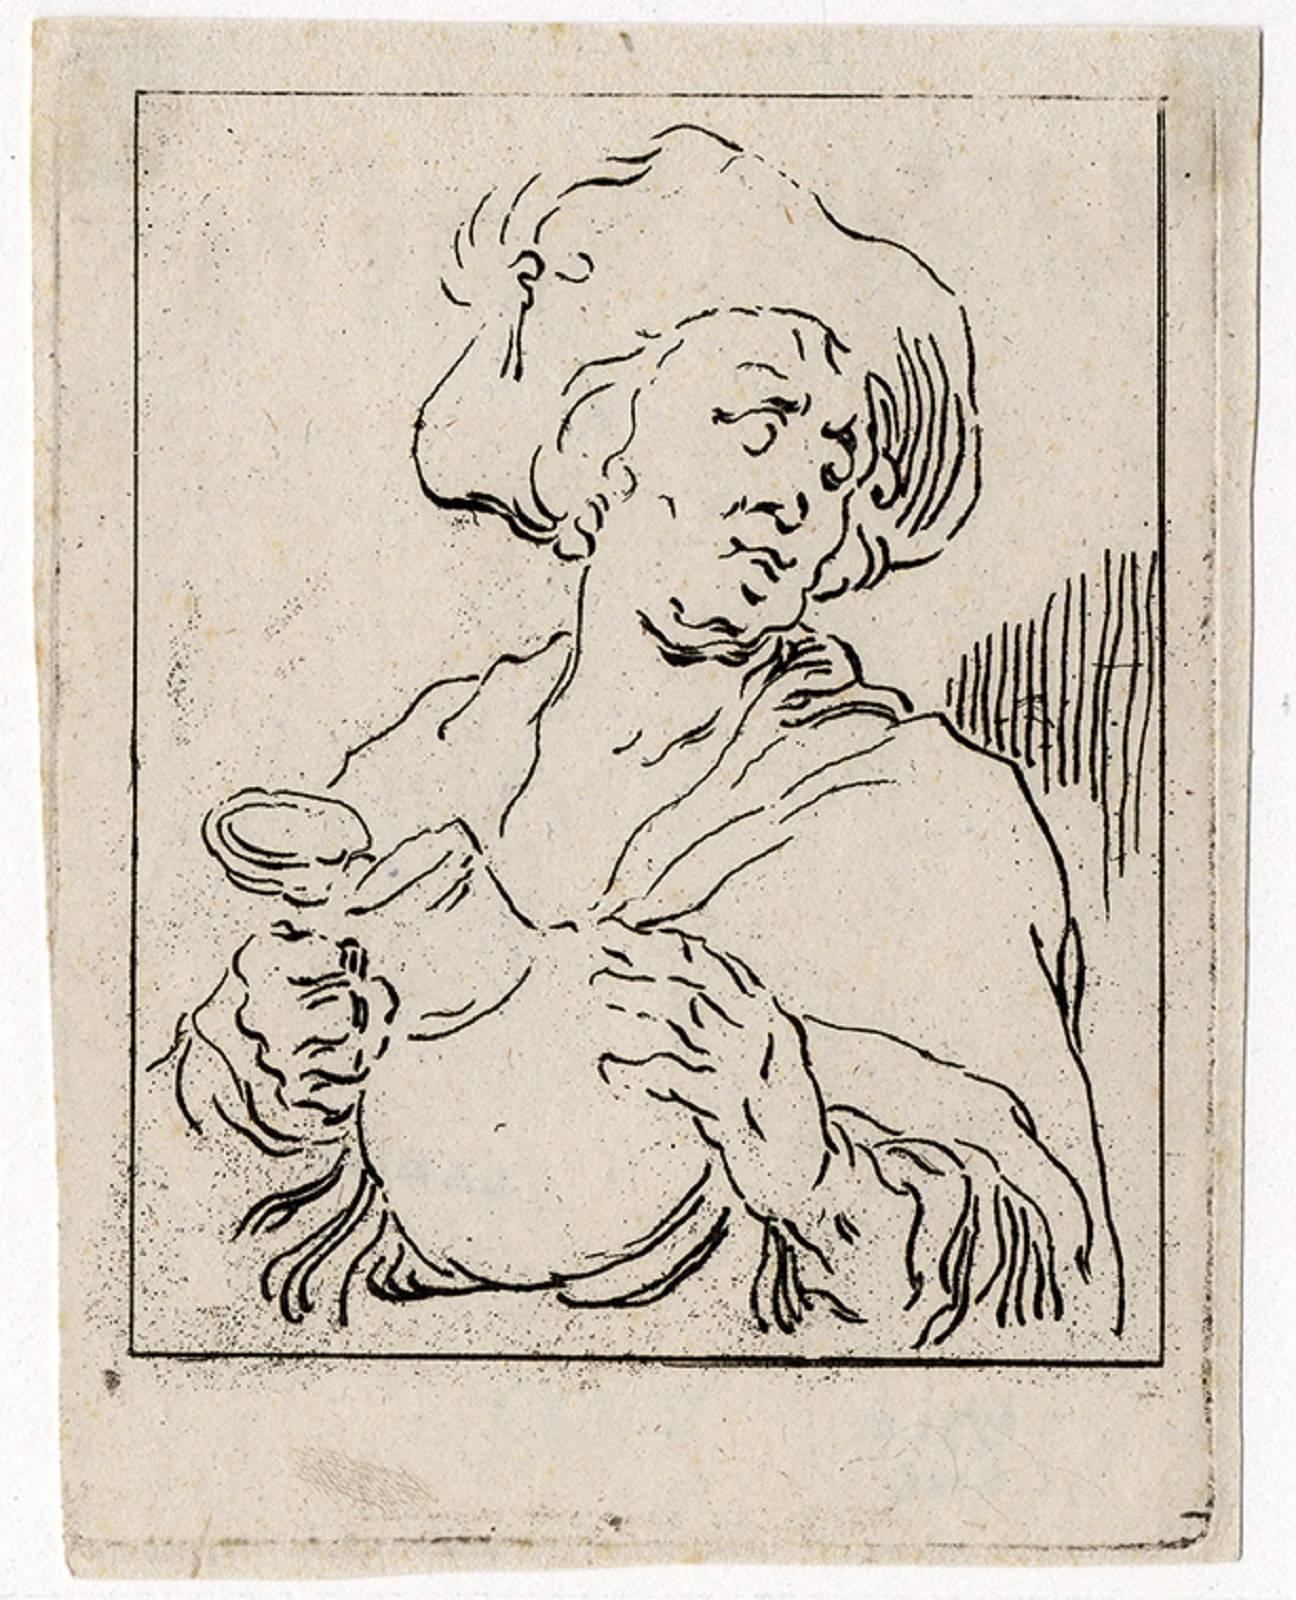  2 Antique master prints, Untitled - A man with a jug. - Print by Anthonie van den Bosch